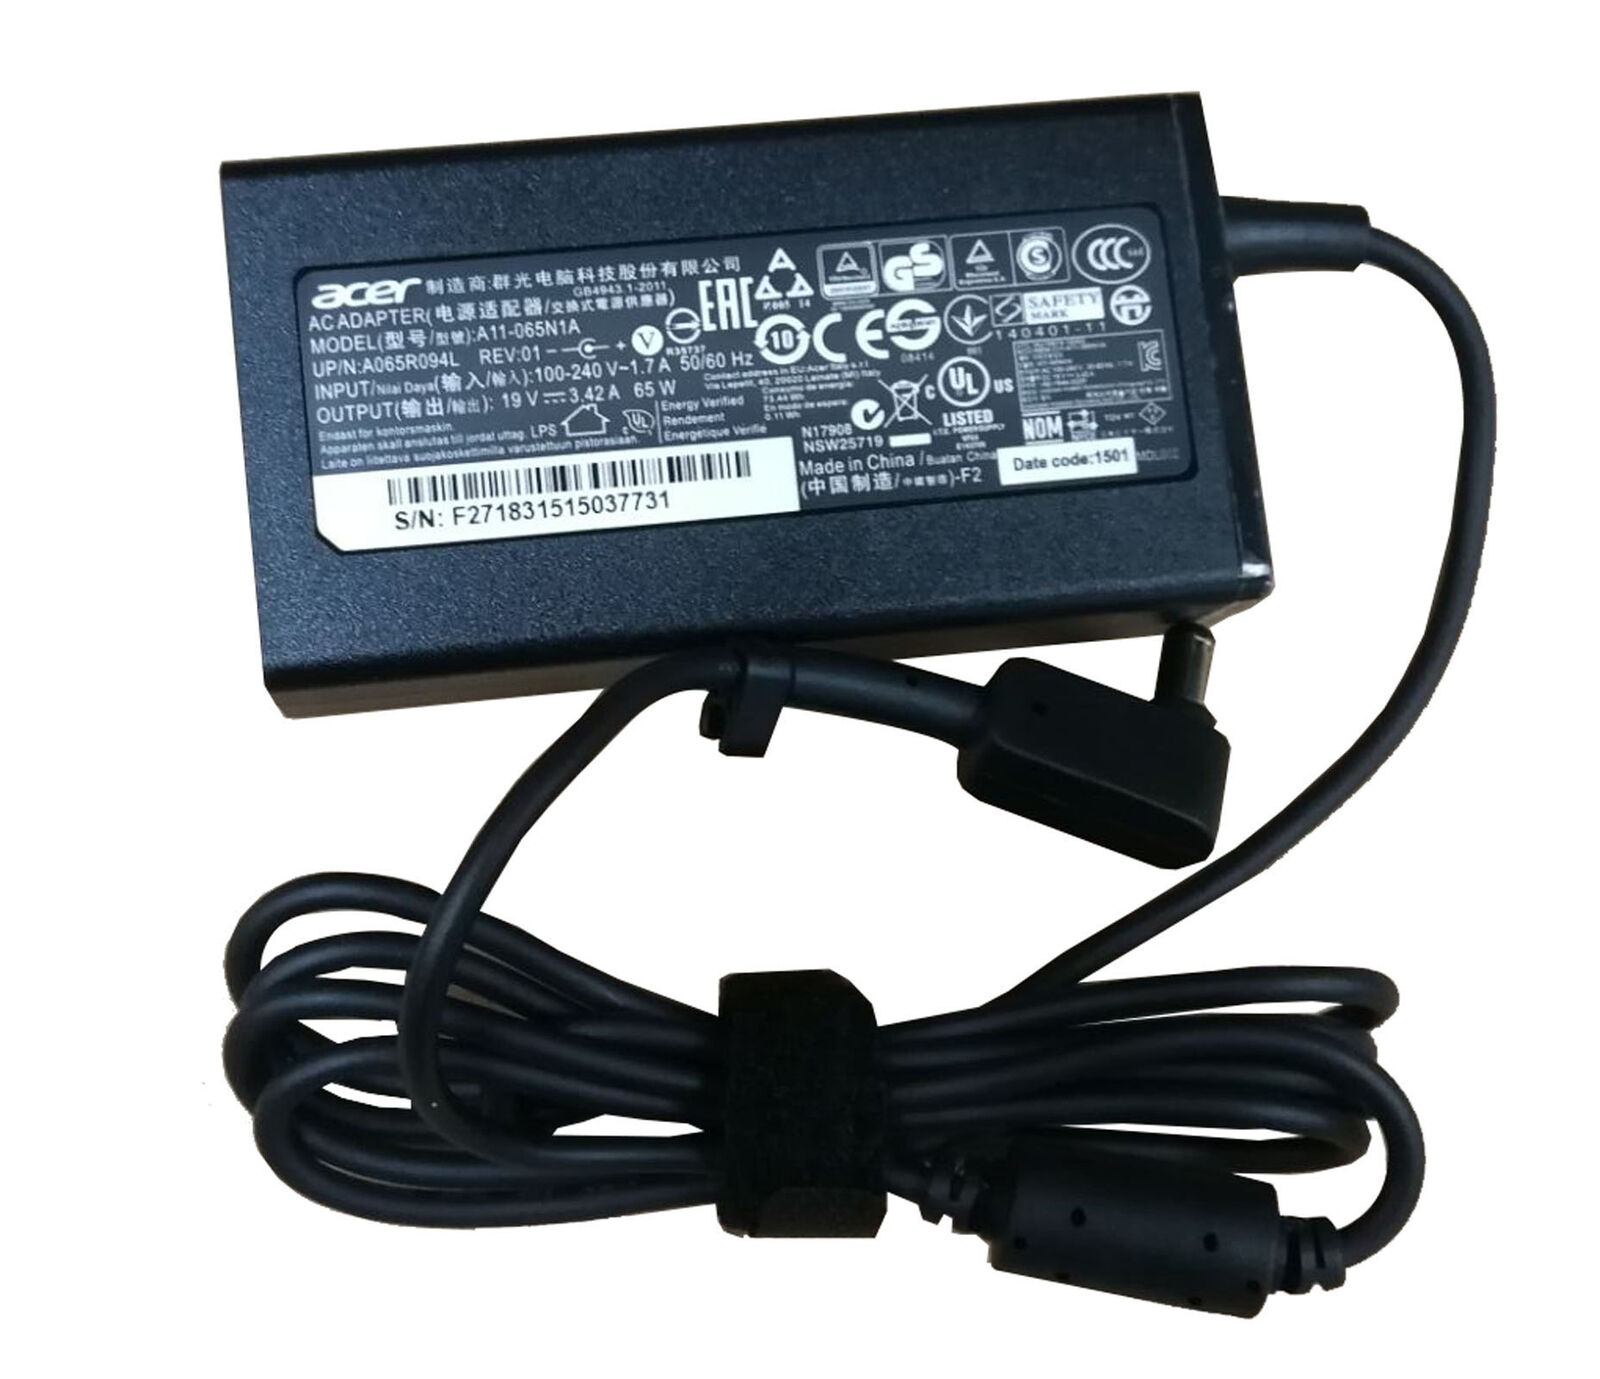 65W Acer Aspire V3-371 Charger AC Adapter Power Cord